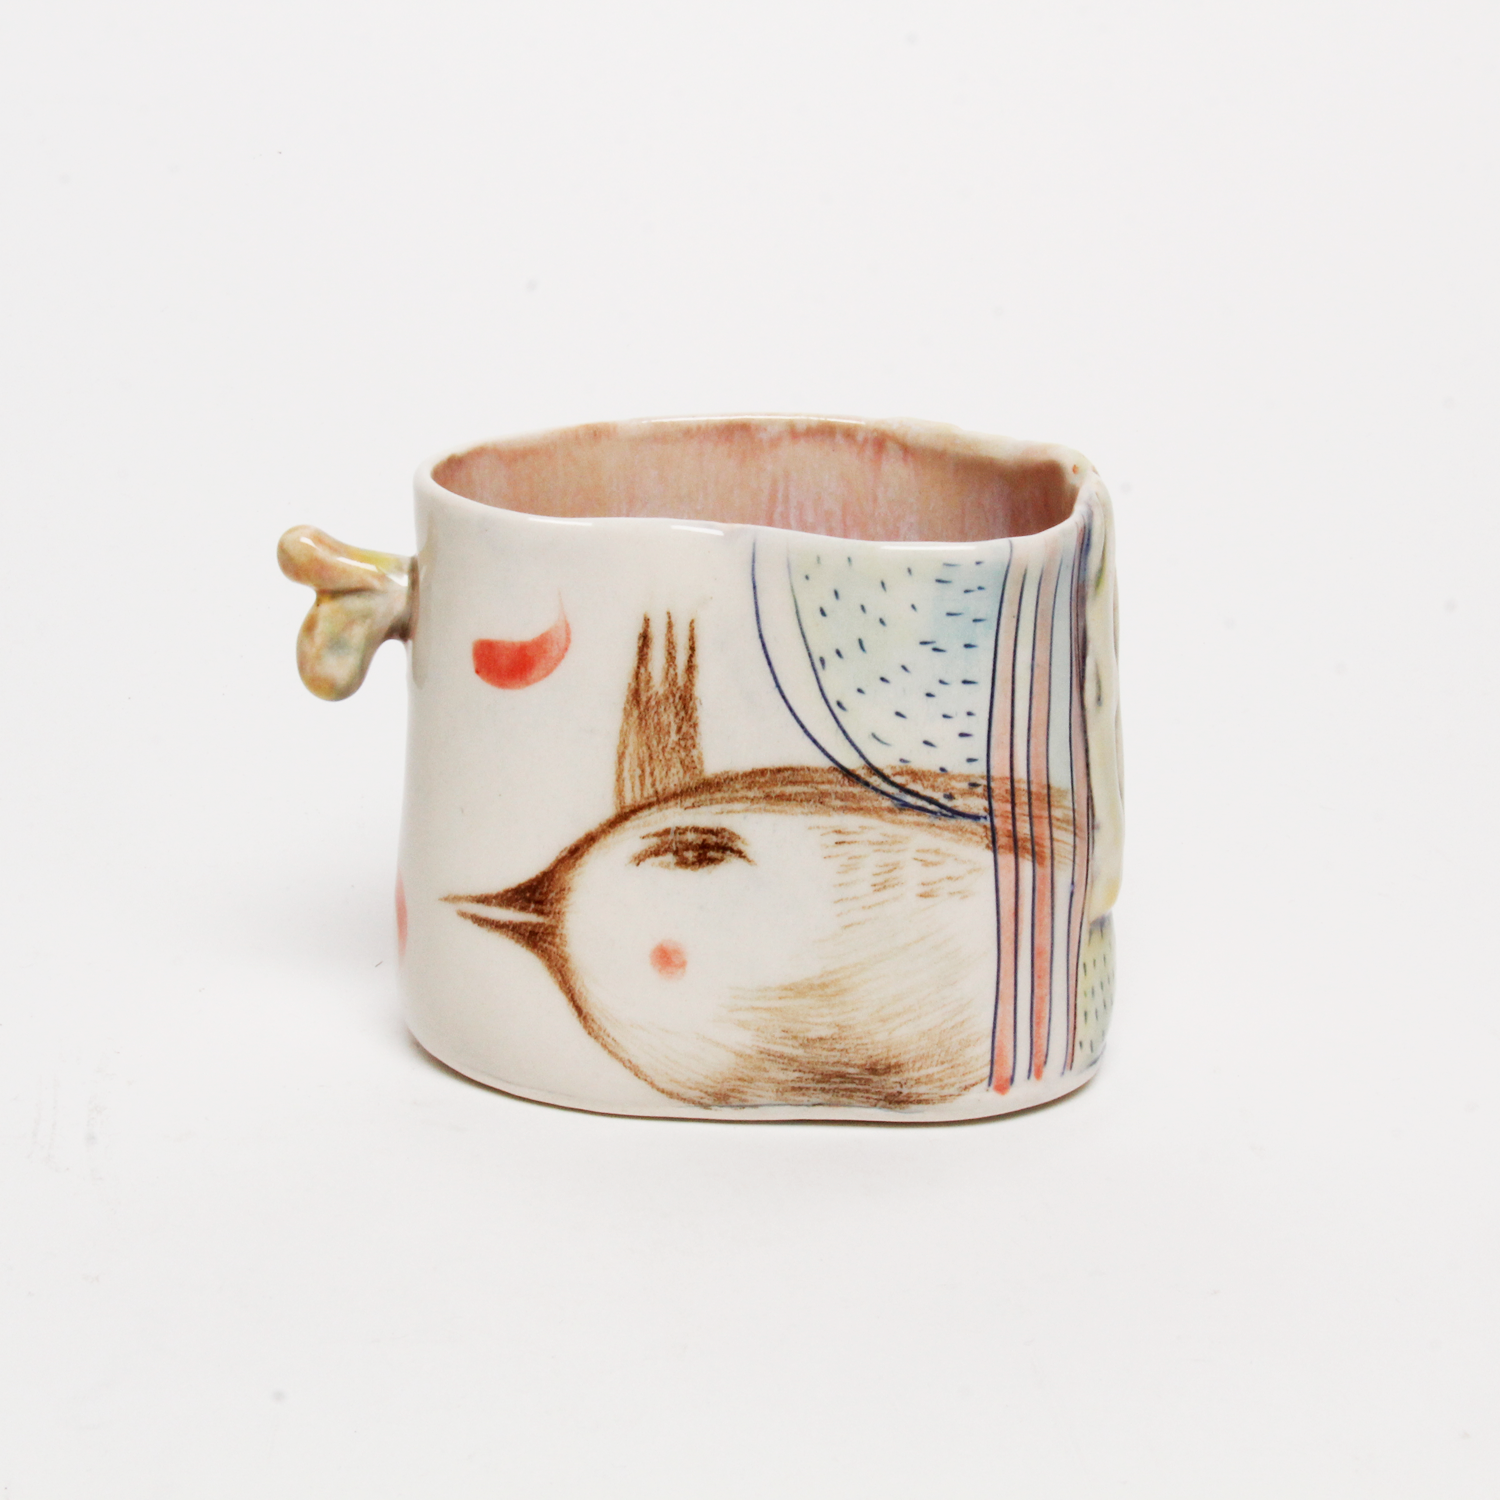 Maria Moldovan: Vase With Bird Design Product Image 3 of 5